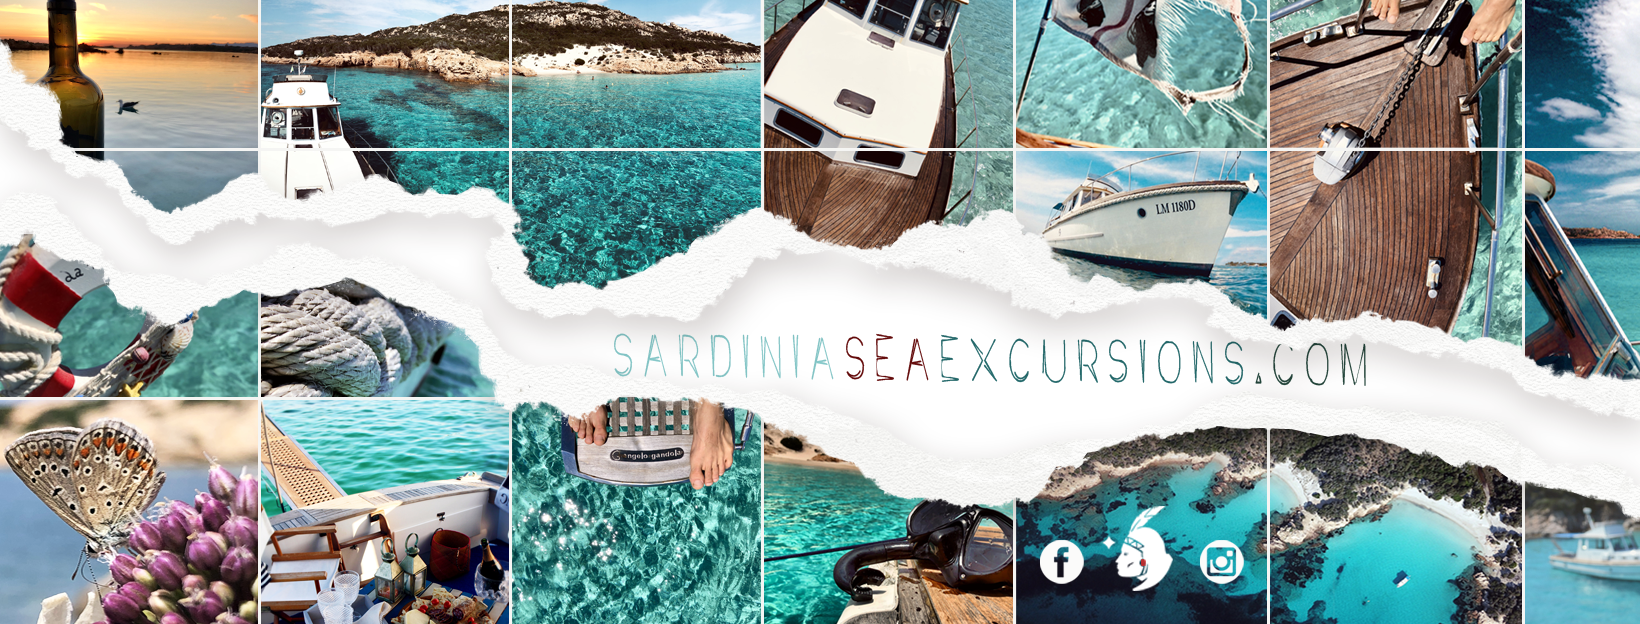 Private boat excursions and tours in the islands of La Maddalena National Park